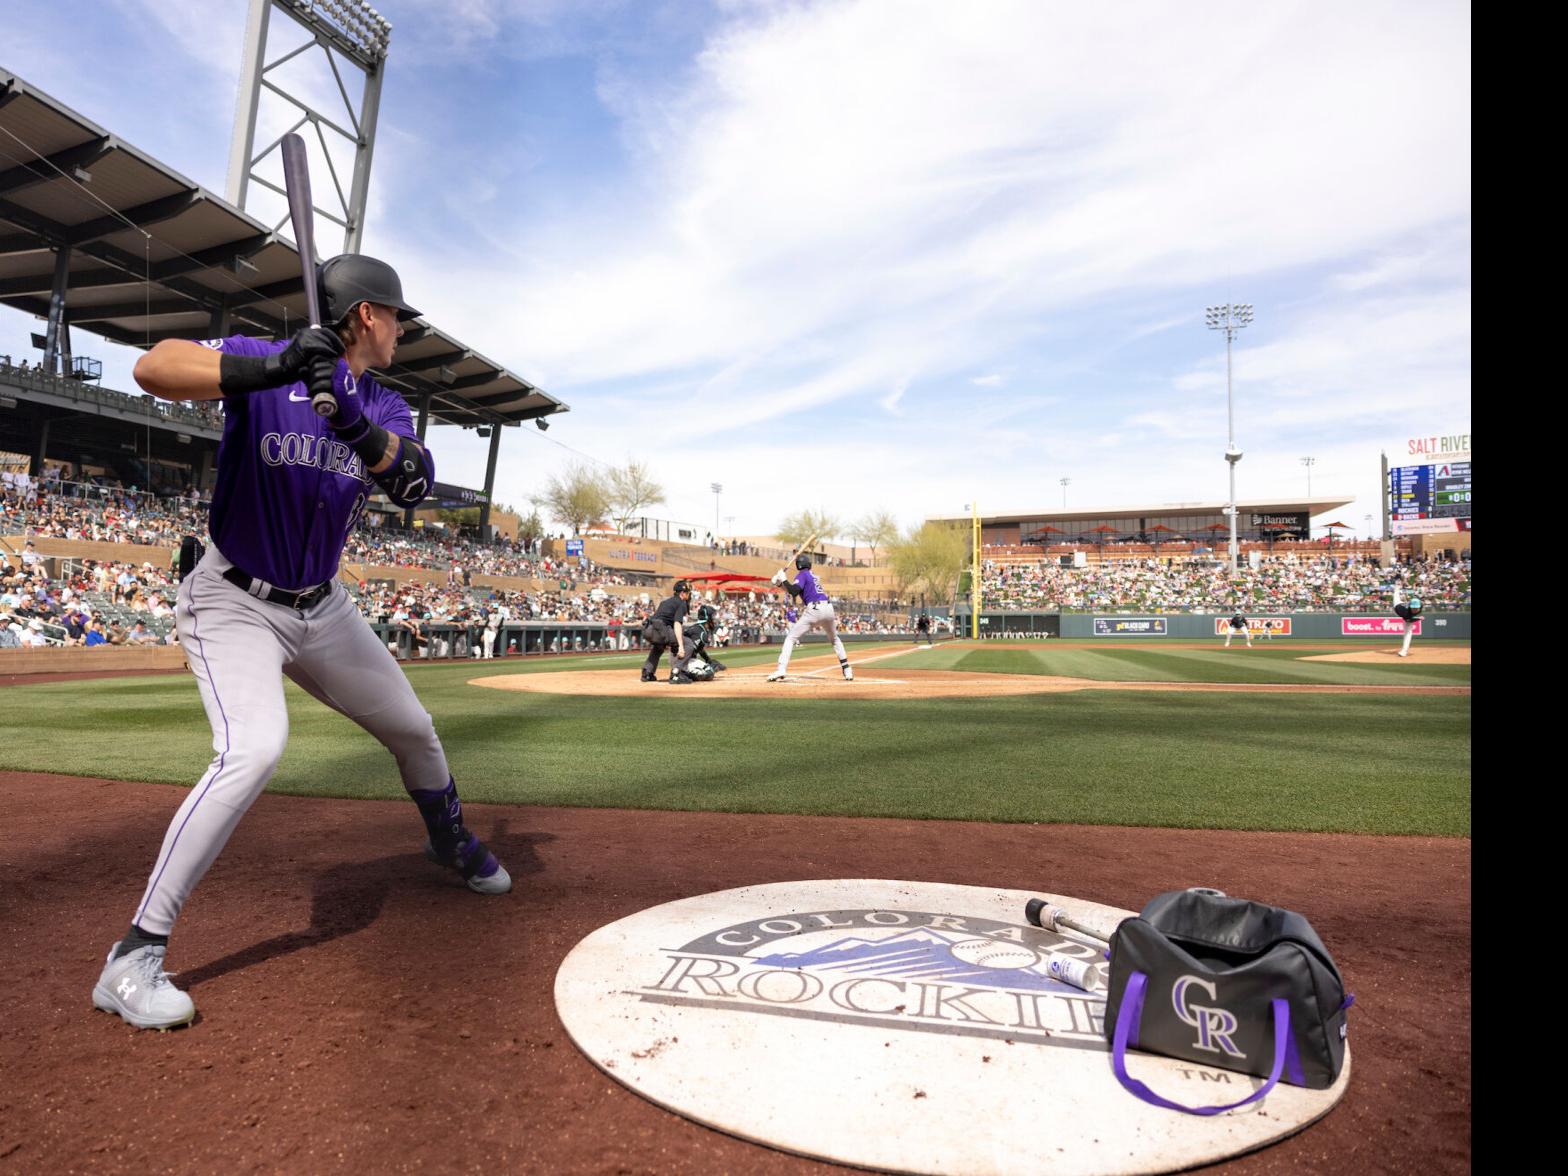 Jordan Beck is following Todd Helton's footsteps for Rockies, Sports  Coverage